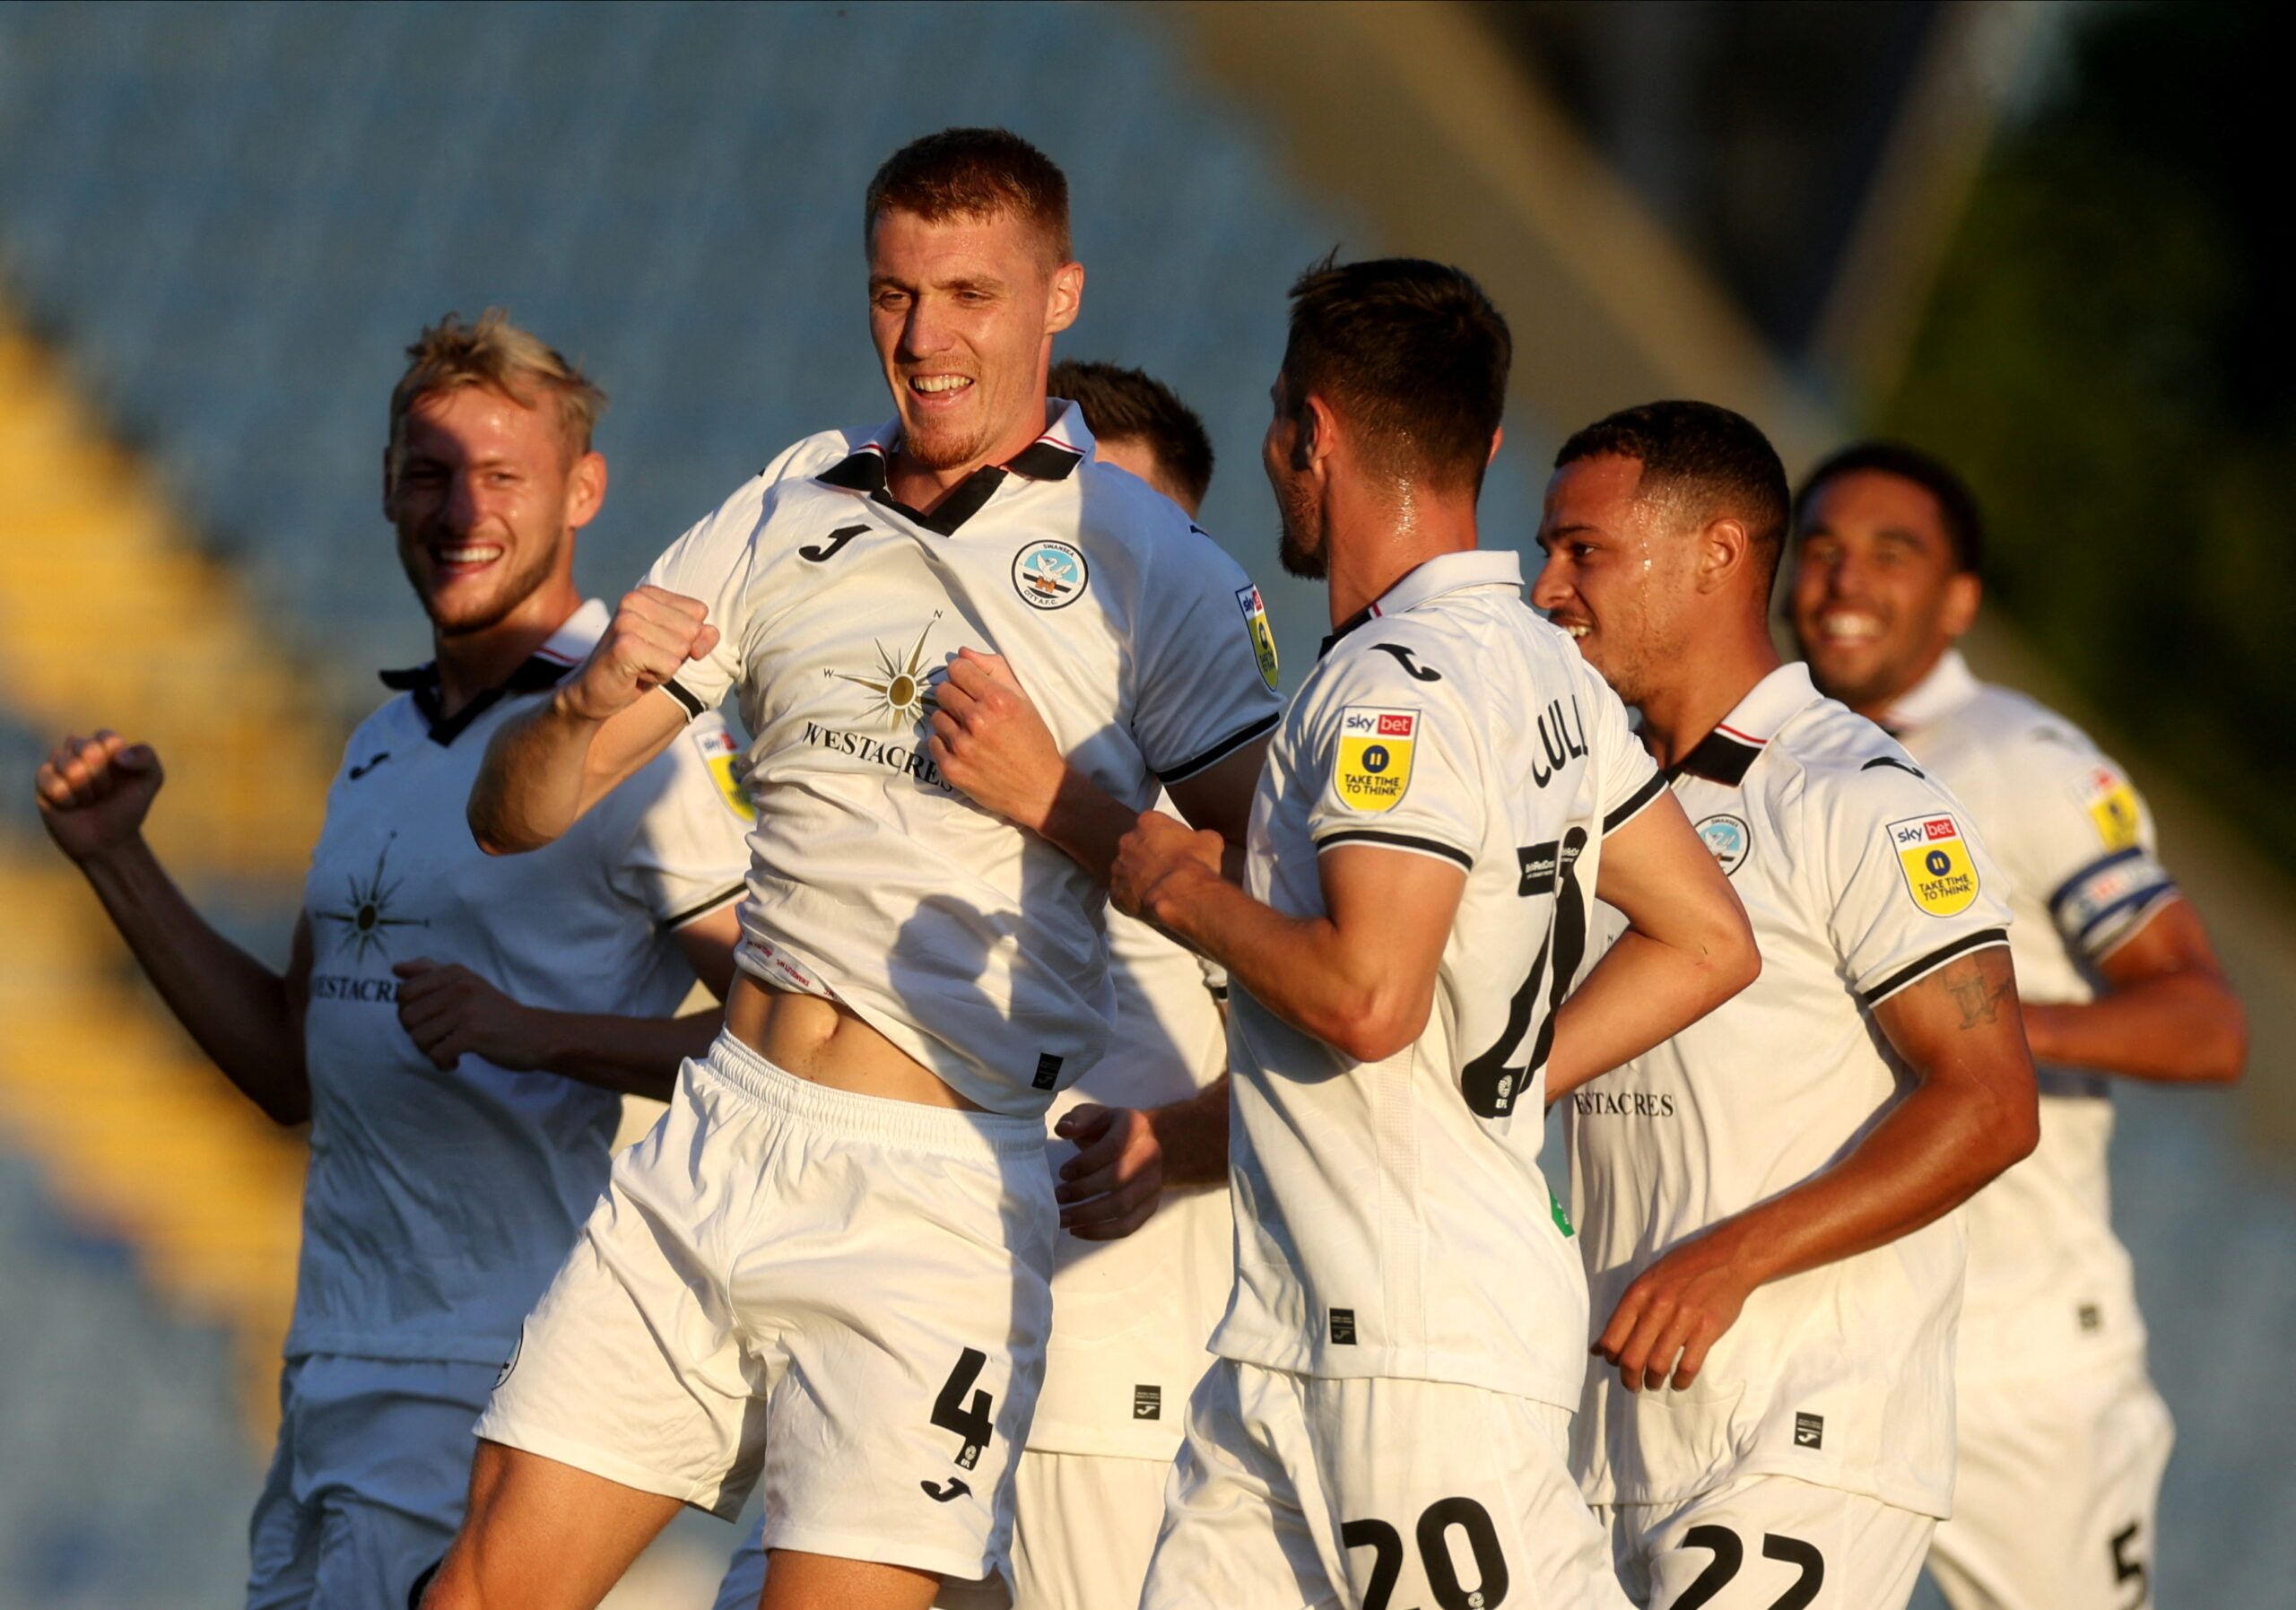 Soccer Football - Carabao Cup - Oxford United v Swansea City - Kassam Stadium, Oxford, Britain - August 9, 2022  Swansea City's Jay Fulton celebrates scoring their first goal with teammates  Action Images/Paul Childs  EDITORIAL USE ONLY. No use with unauthorized audio, video, data, fixture lists, club/league logos or 